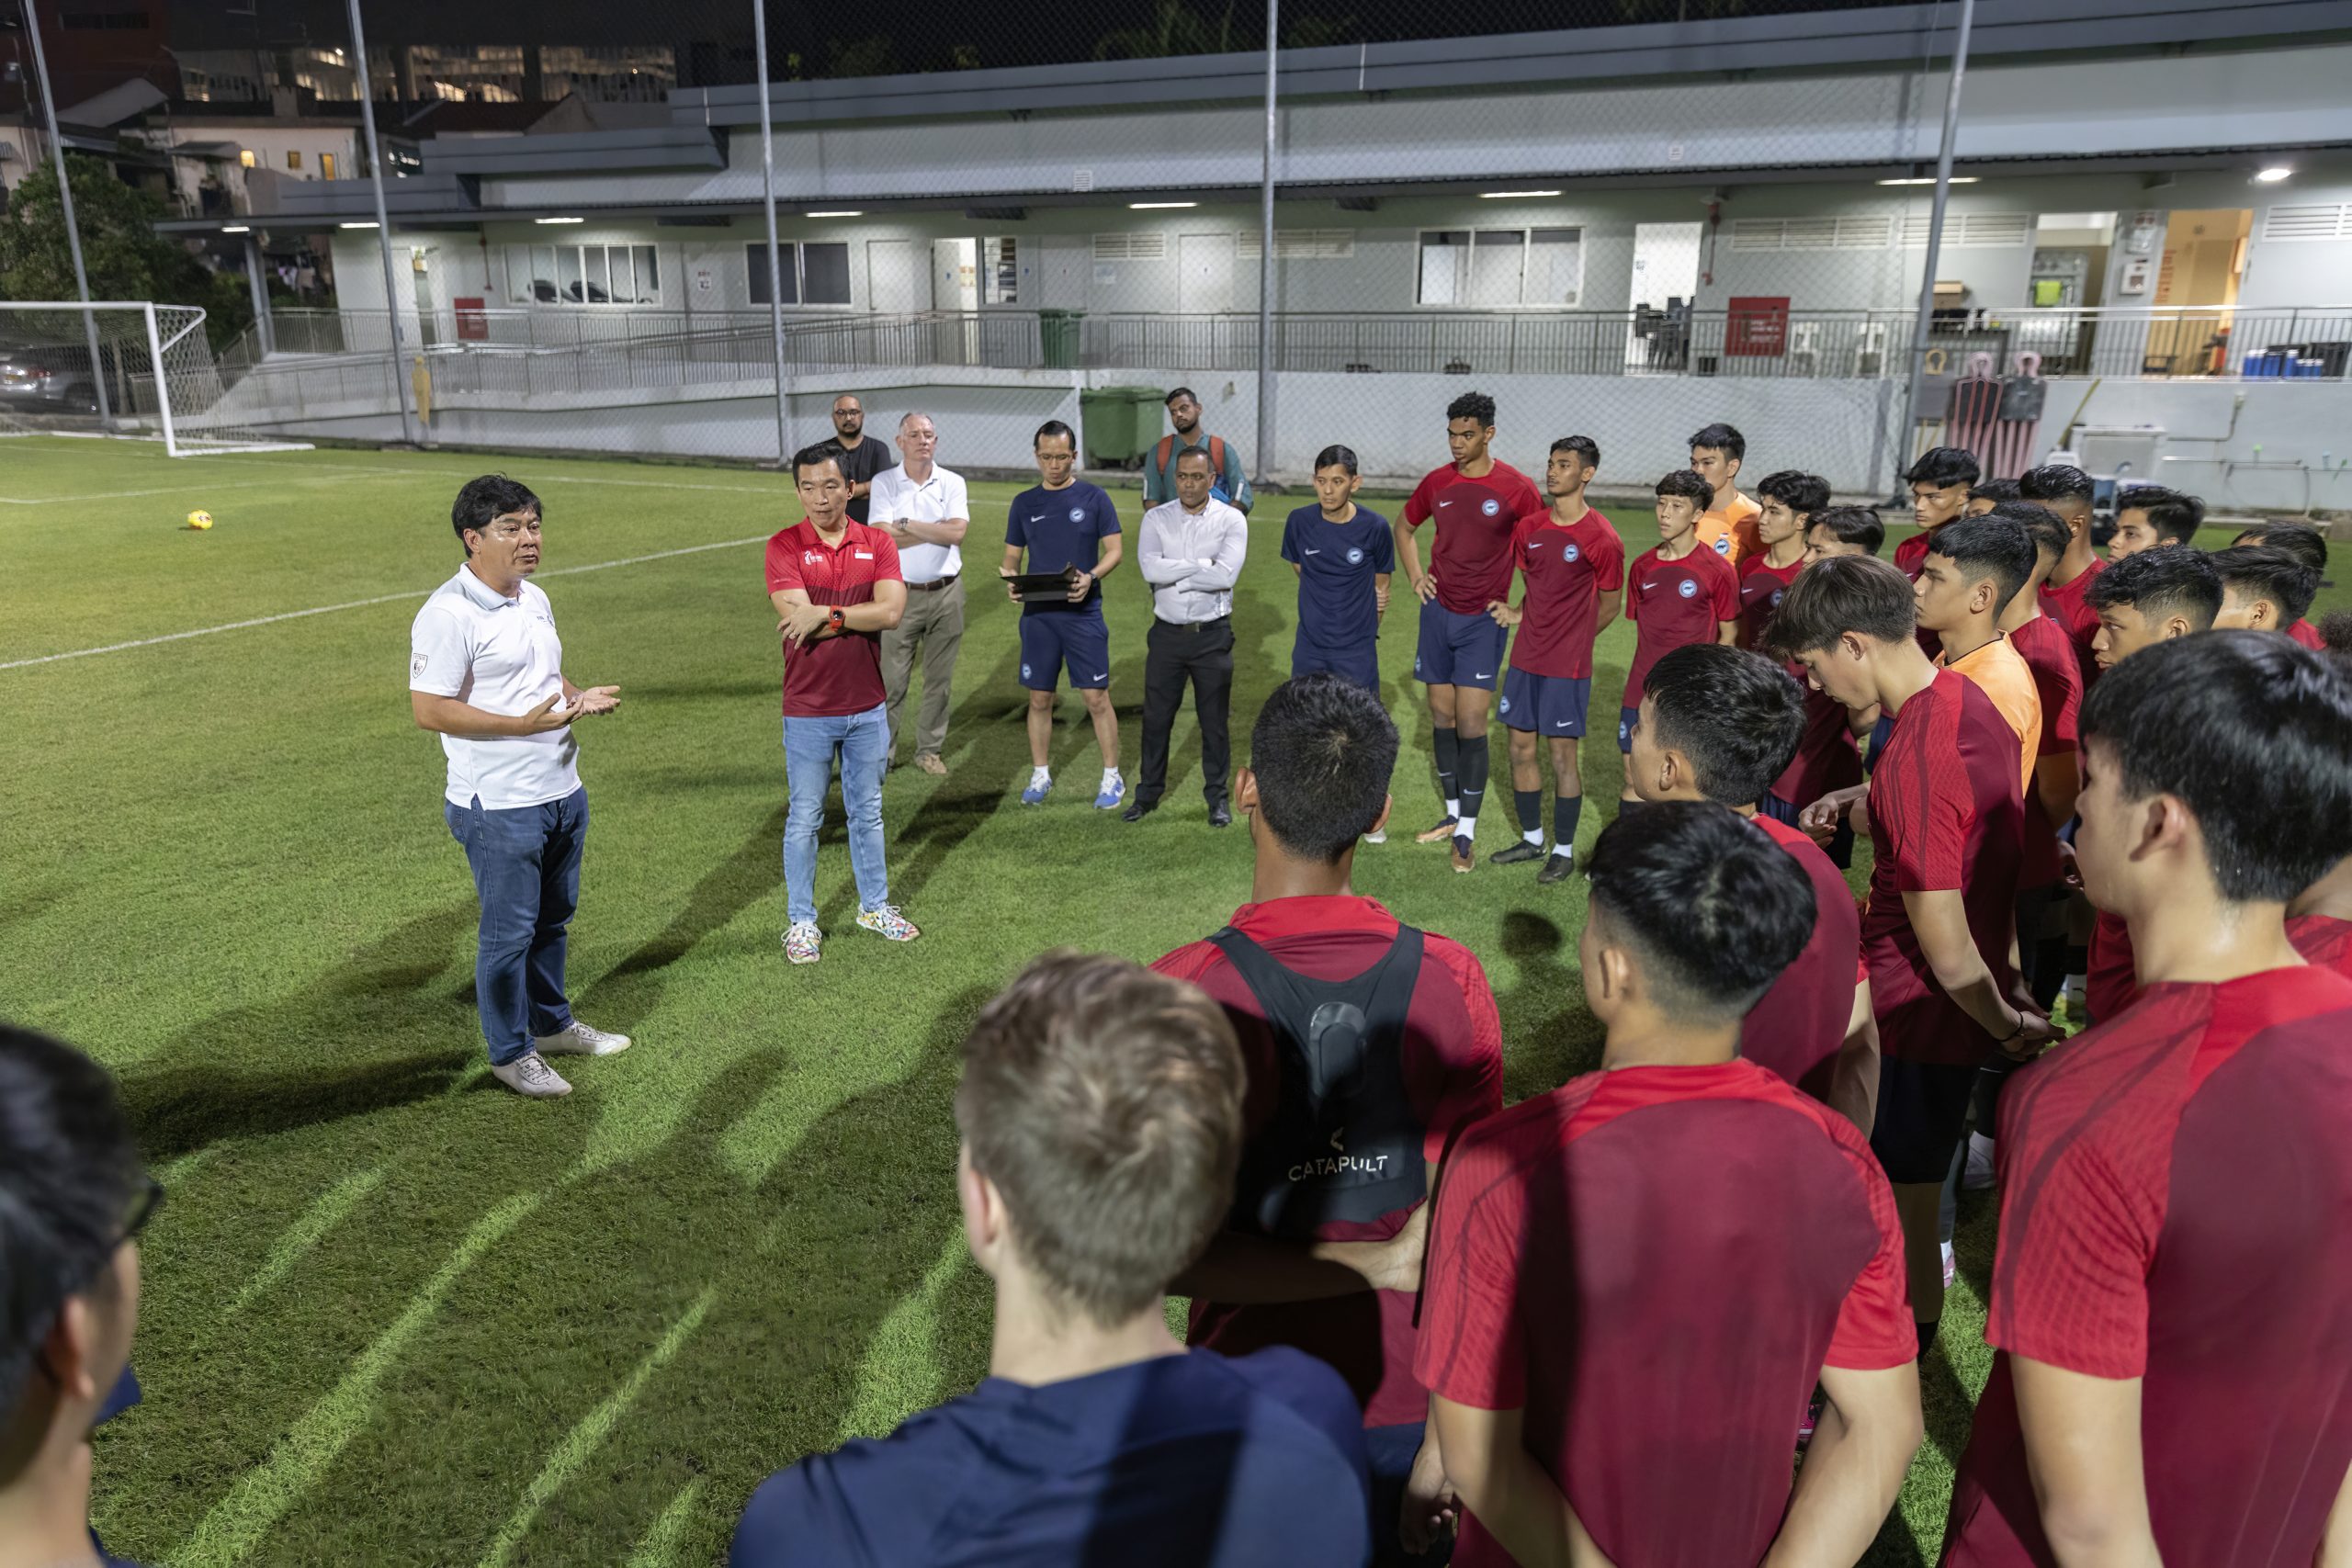 ‘Singapore Has No Divine Right To Be Top in ASEAN’: FAS Acting President on the State of Local Football